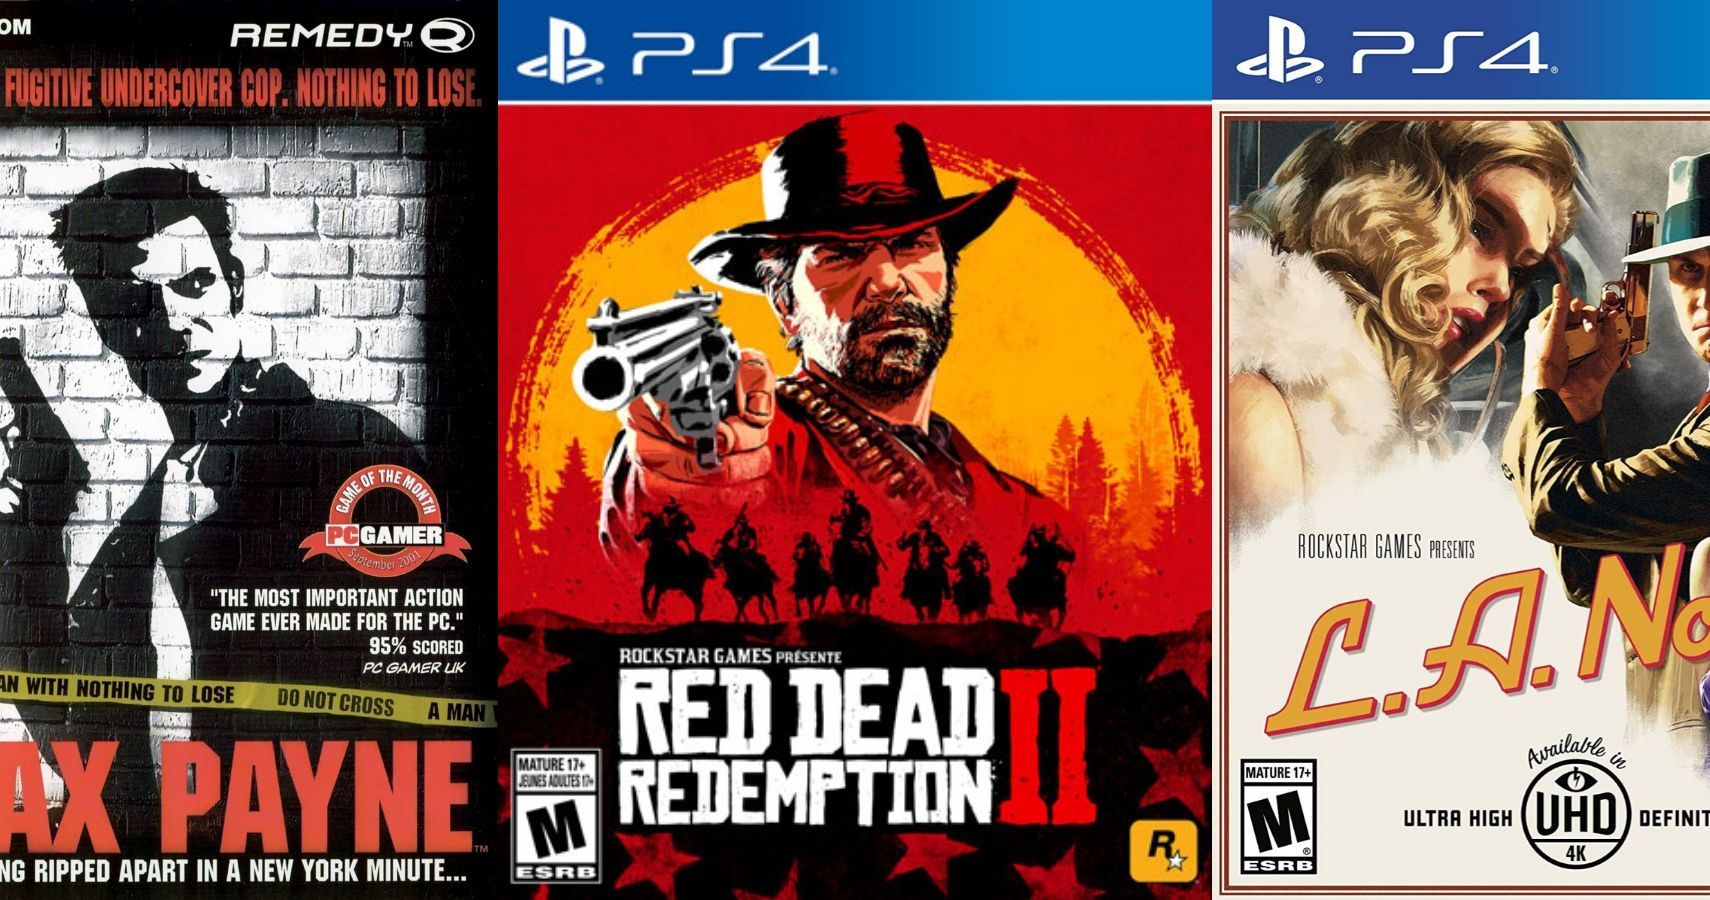 What Rockstar game was the most enjoyable? : r/gaming